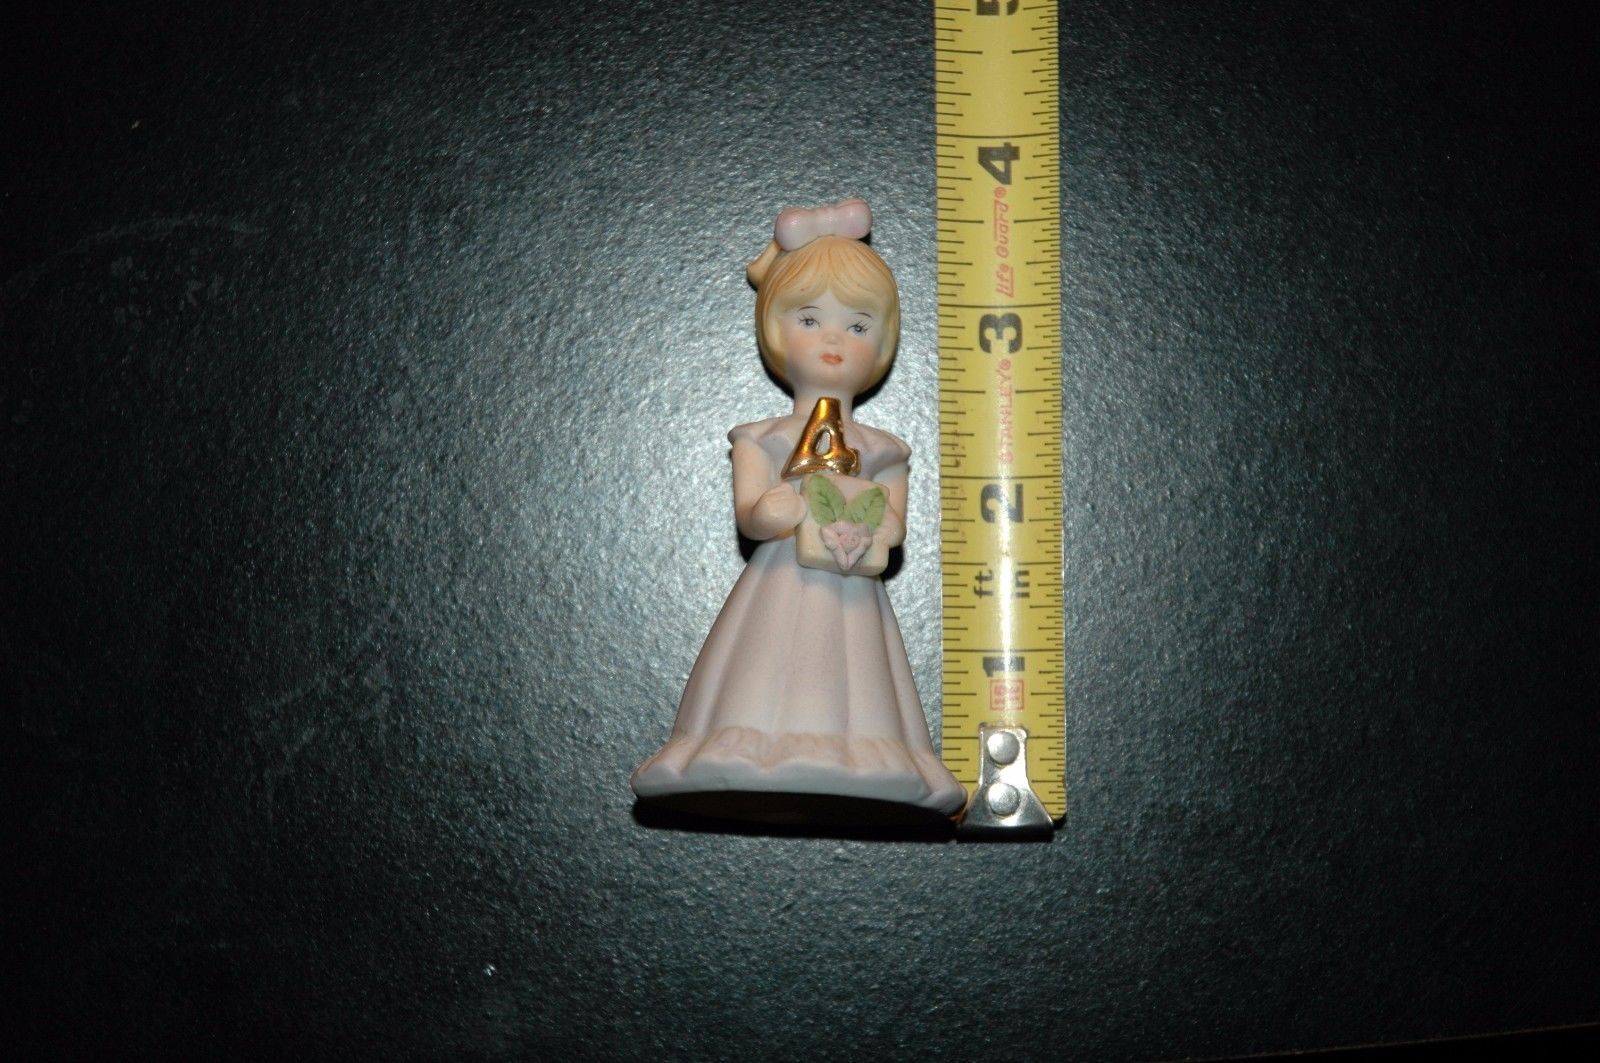 Growing up Birthday Girl Age 4  decorative collectible doll enesco - $8.00